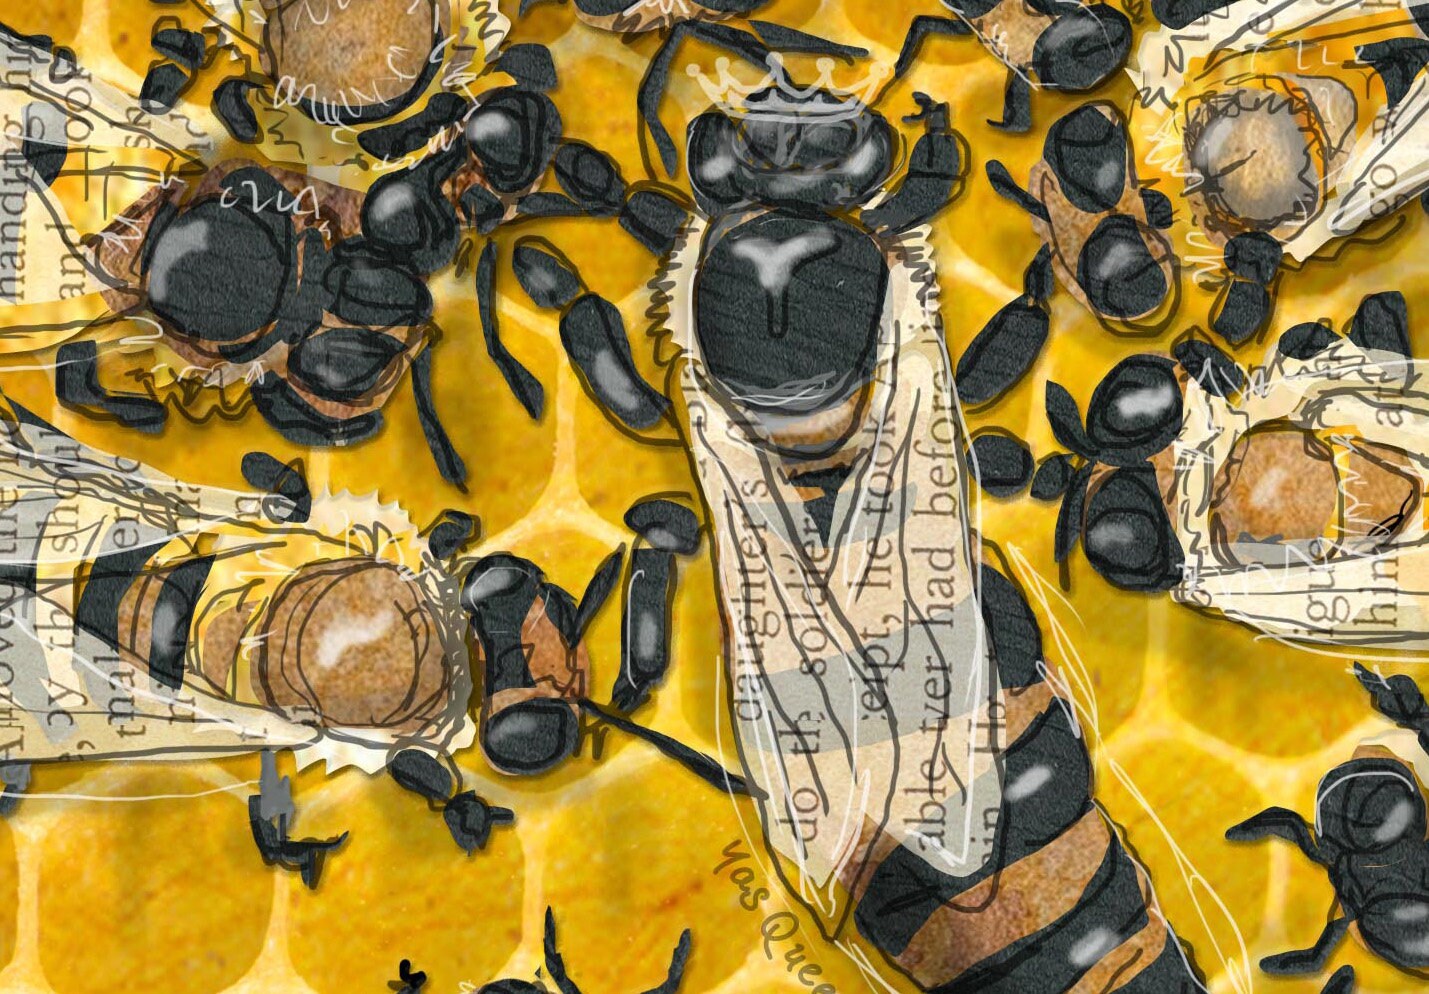 Greeting Card of mixed media collage of a retinue of honeybee workers surrounding the queen, women helping women - Blank Inside